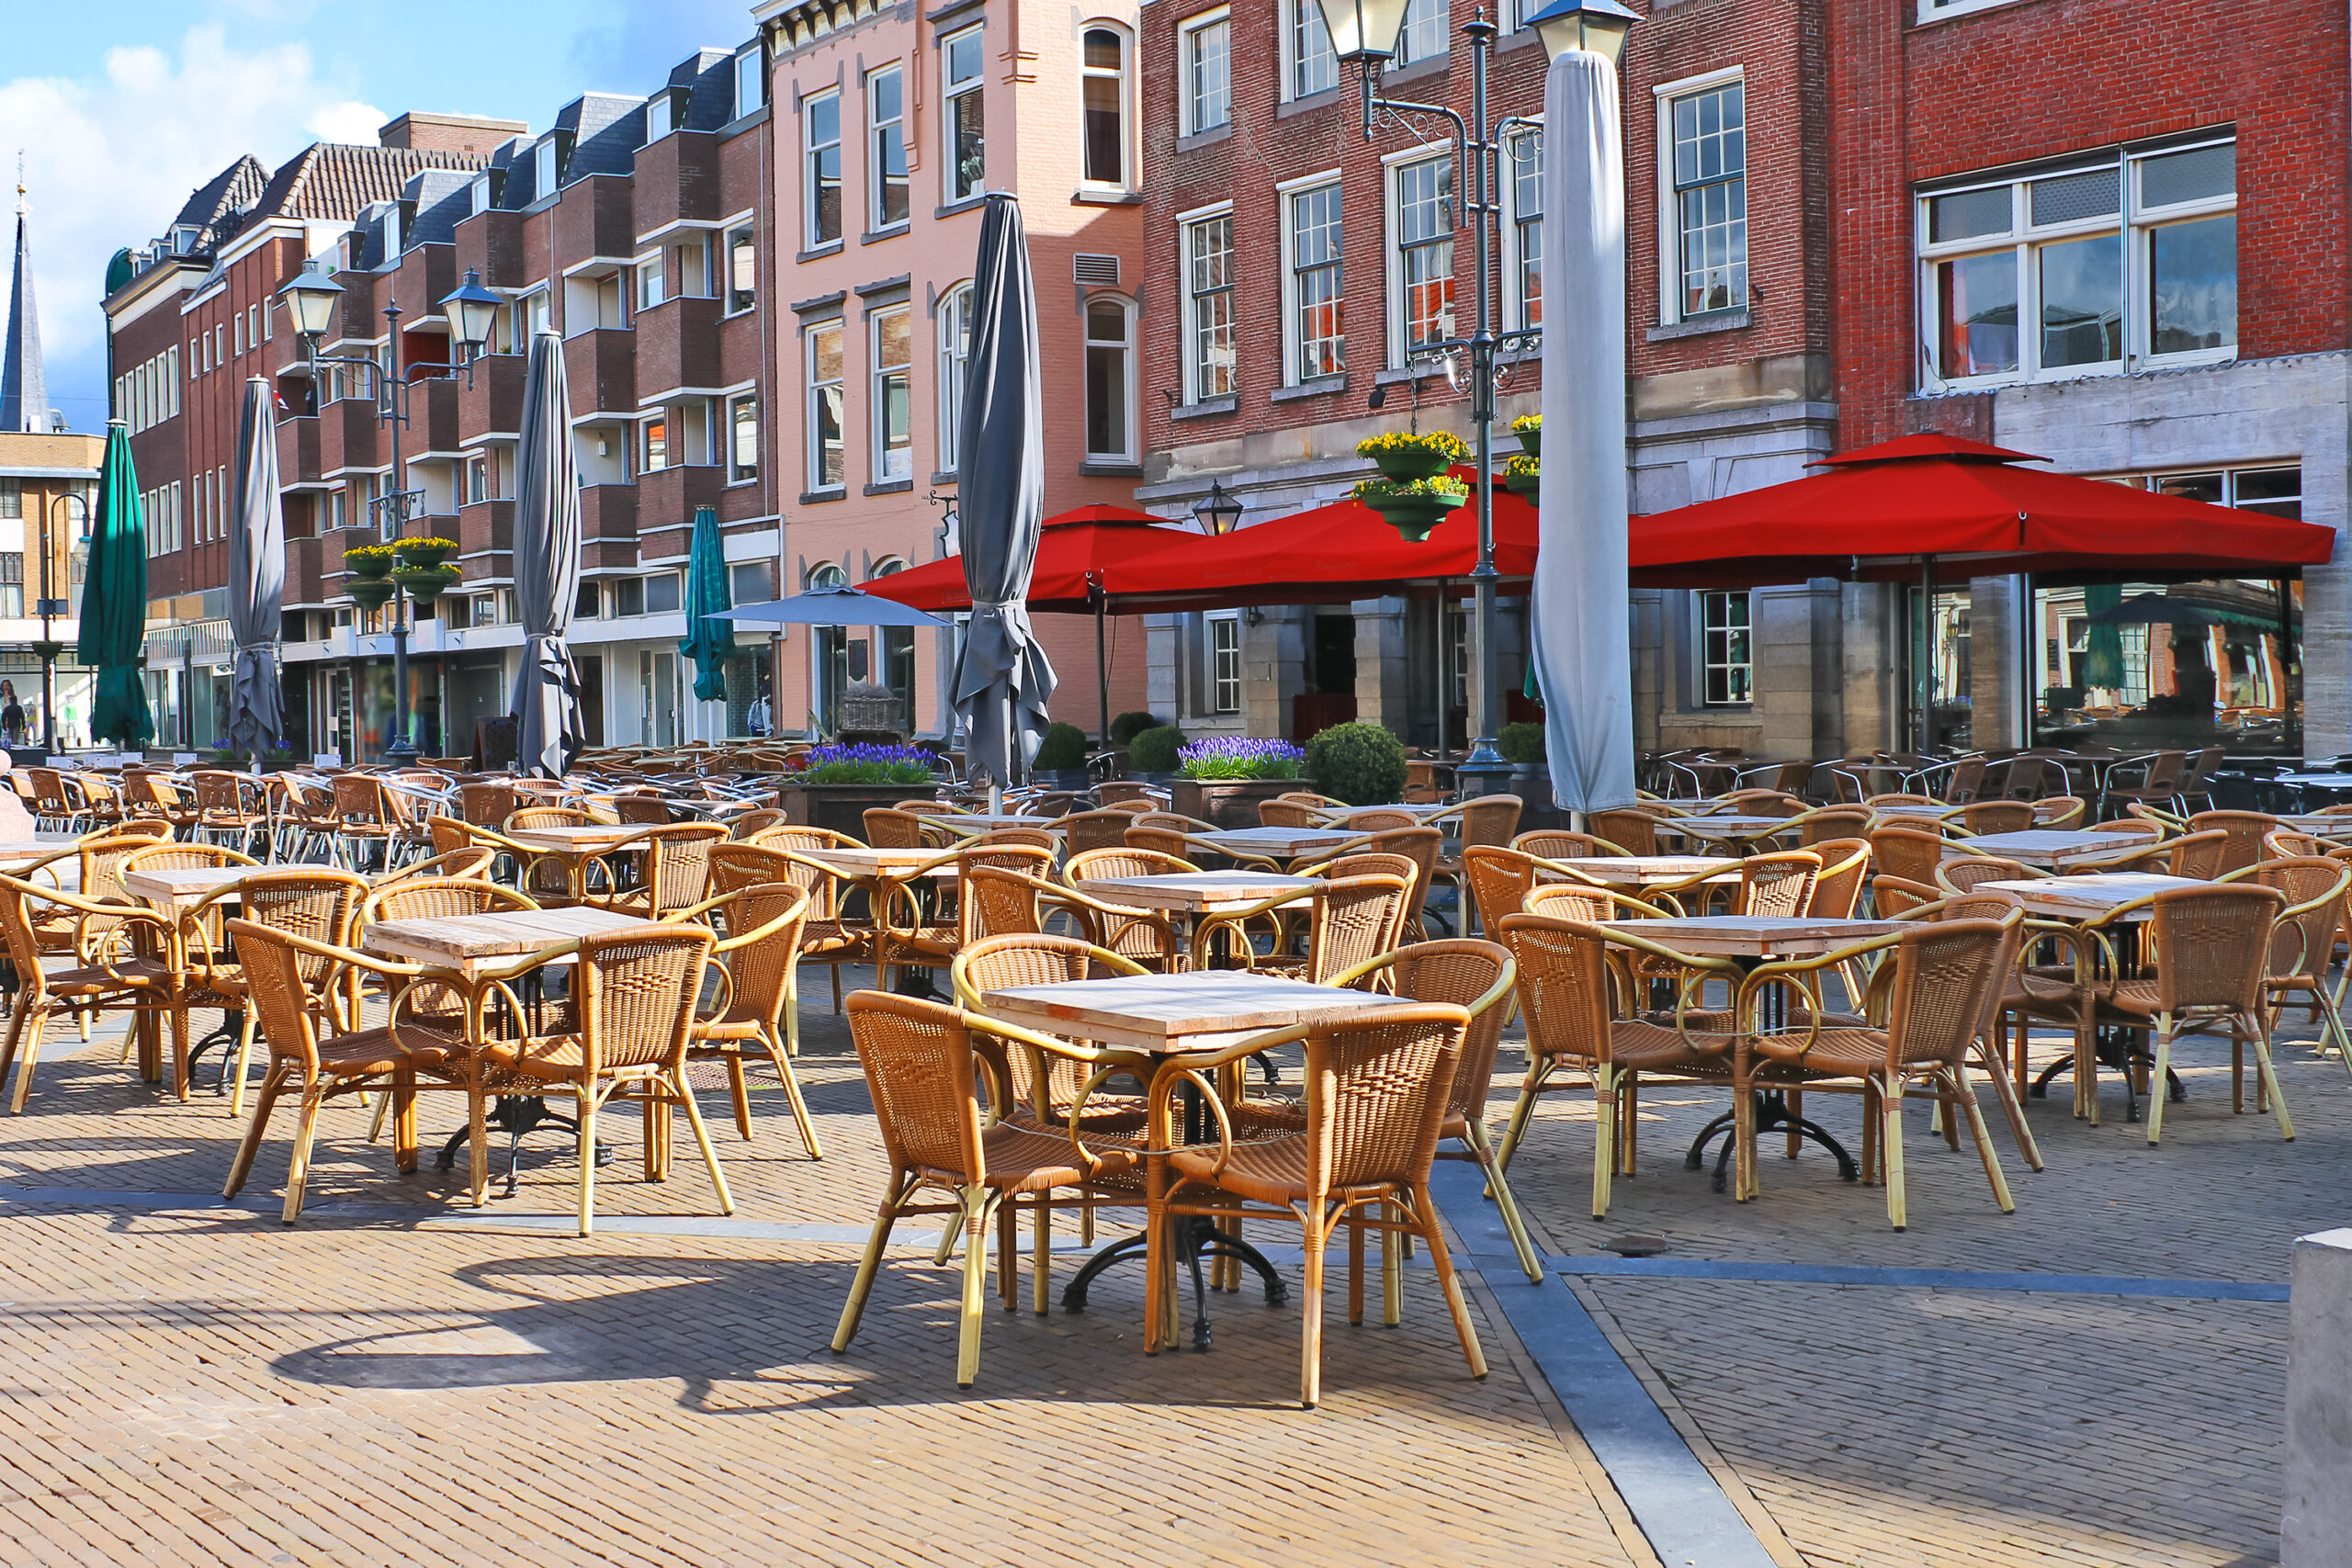 A sunny European plaza with empty tables because of the BA.2 COVID surge